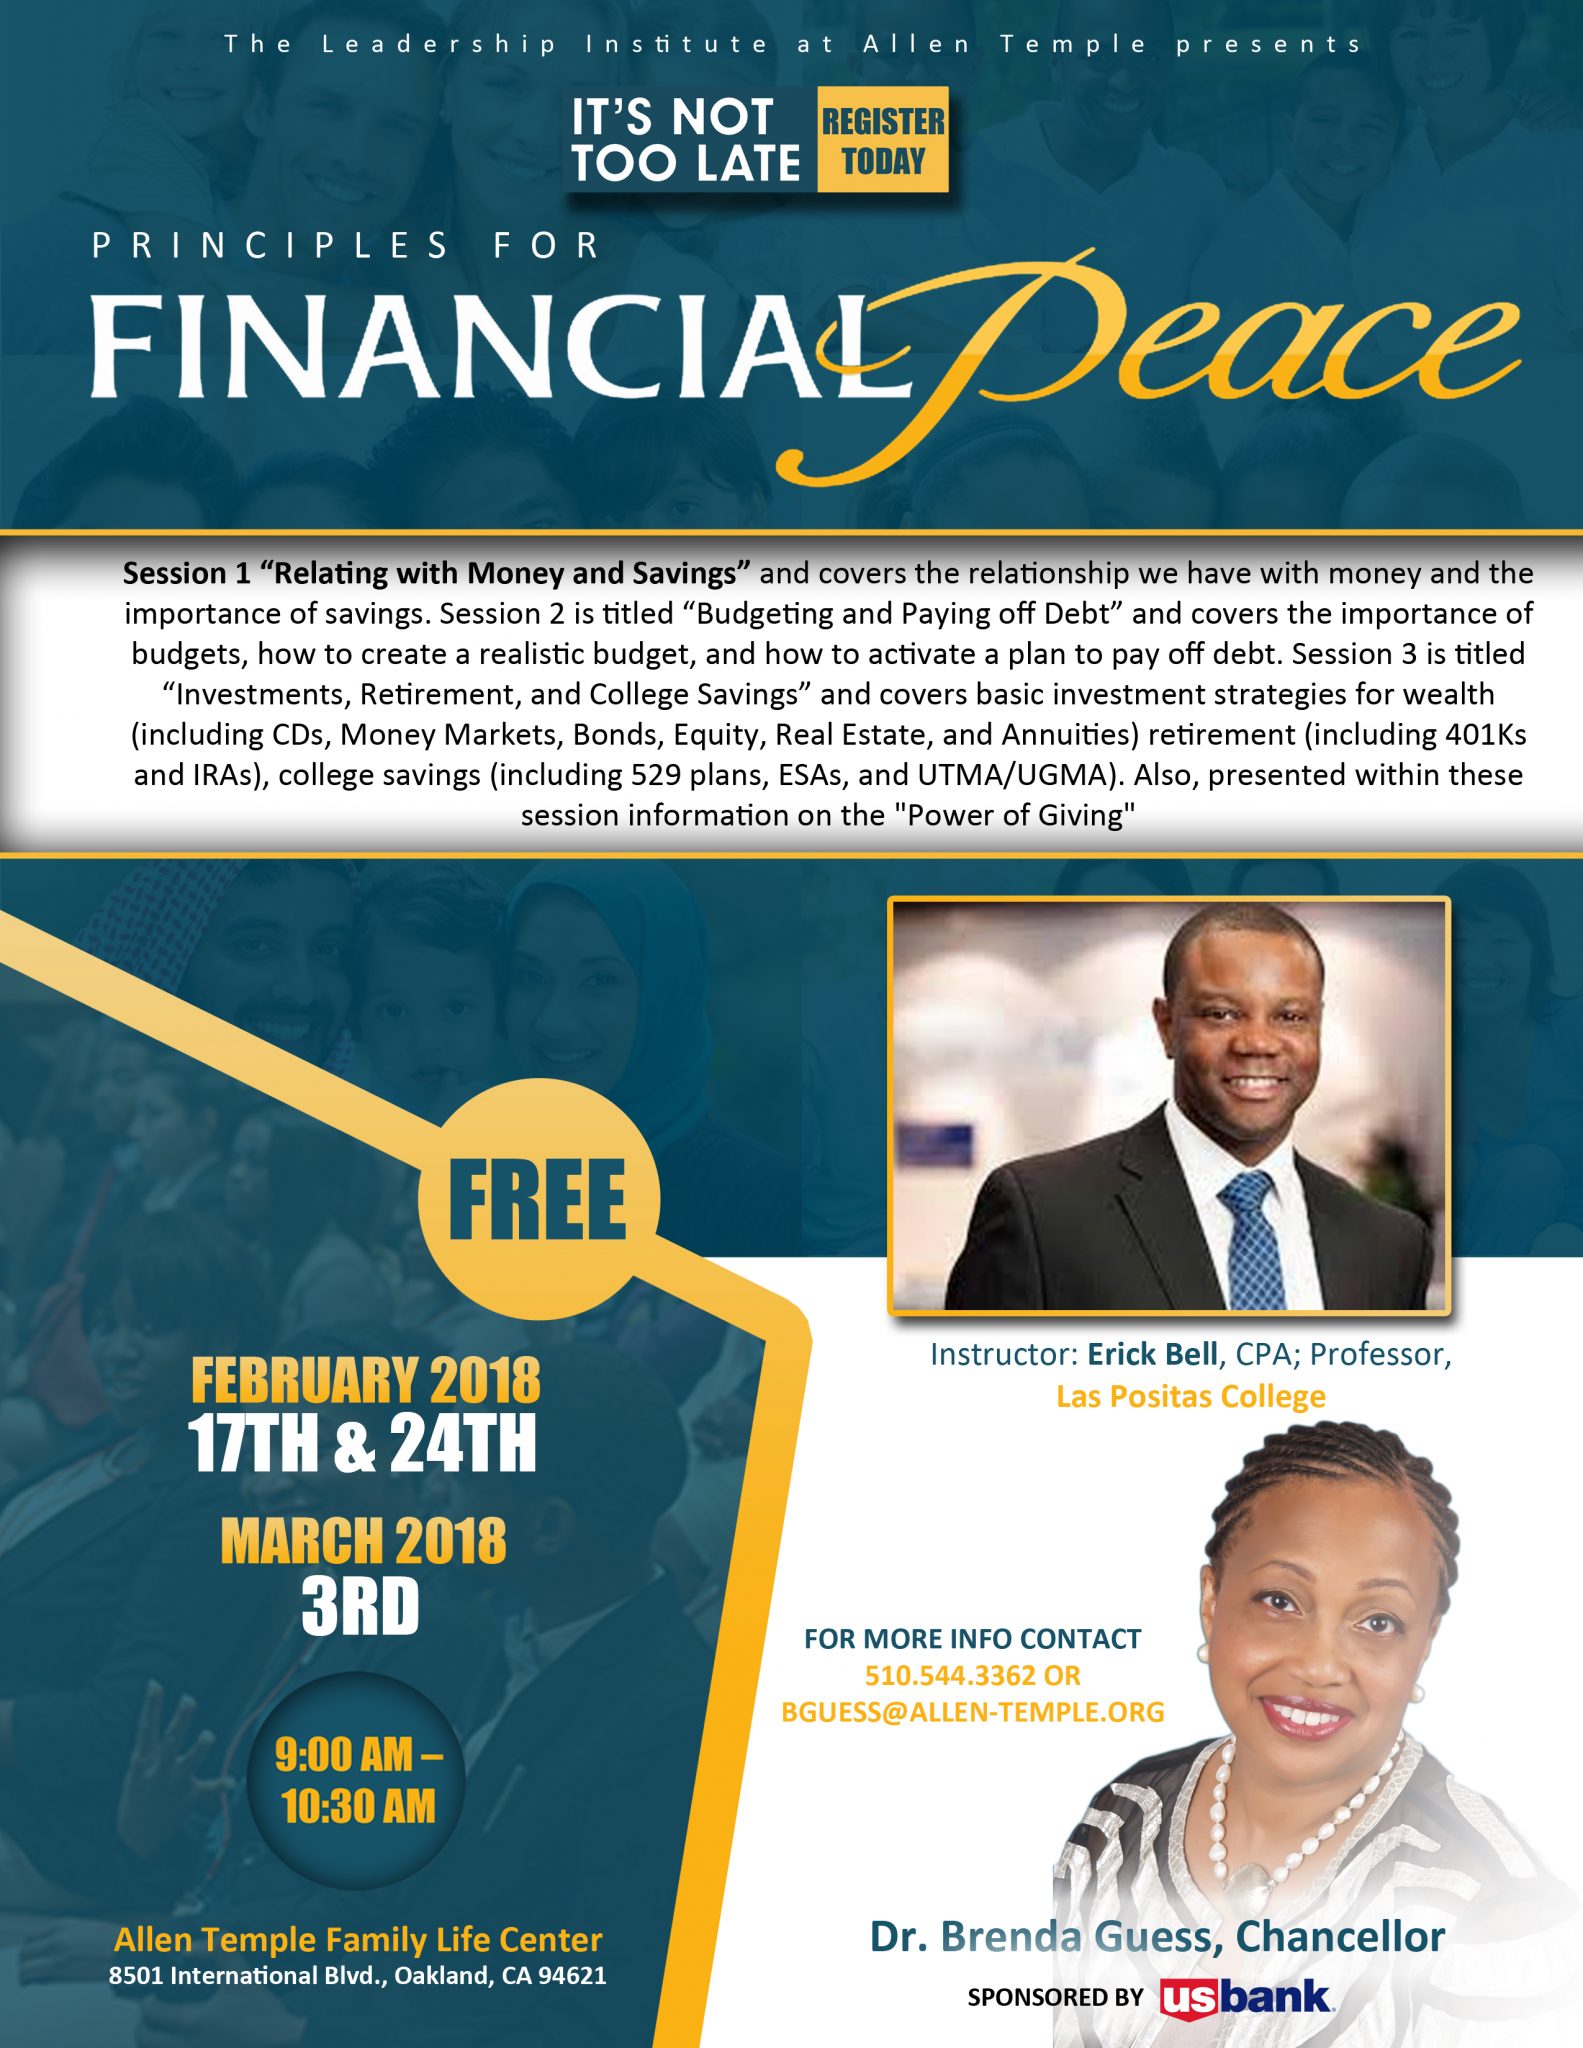 Principles for Financial Peace